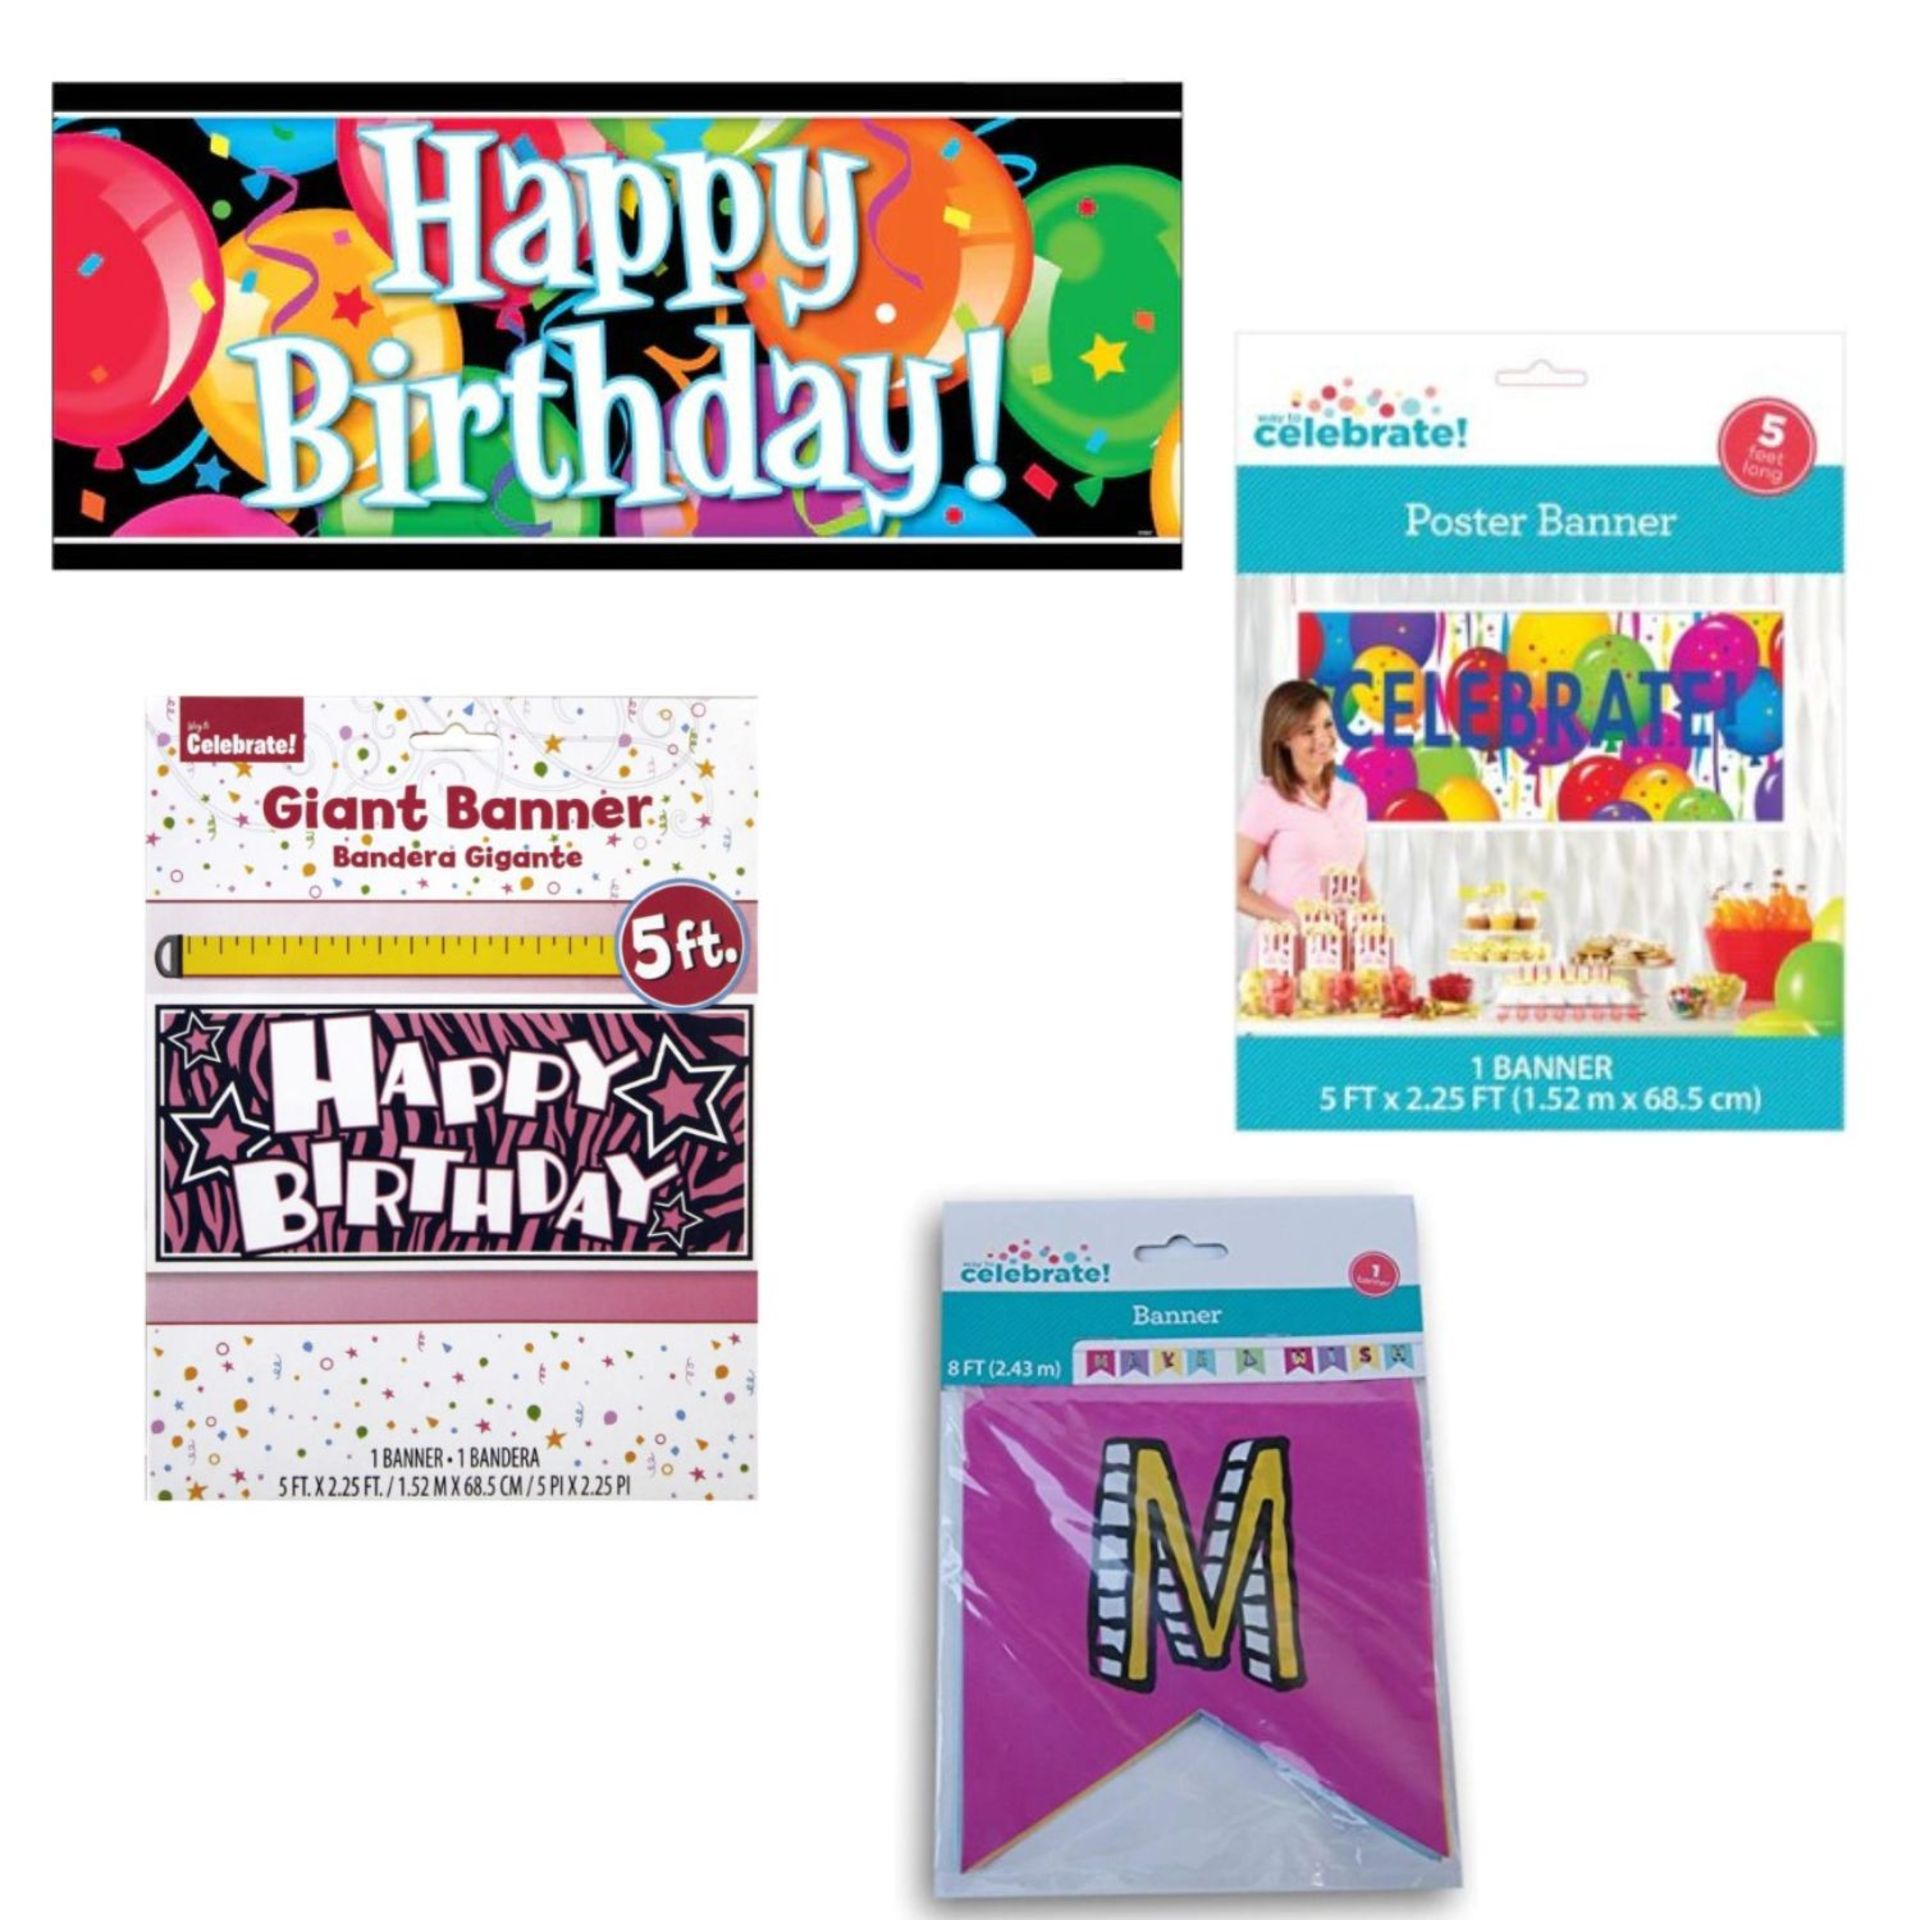 SURPRISE BOX OF 10,000 PARTY ITEMS INCLUDING BANNERS, LANTERNS, FLUTTER BALLS AND GARLANDS - Image 7 of 7